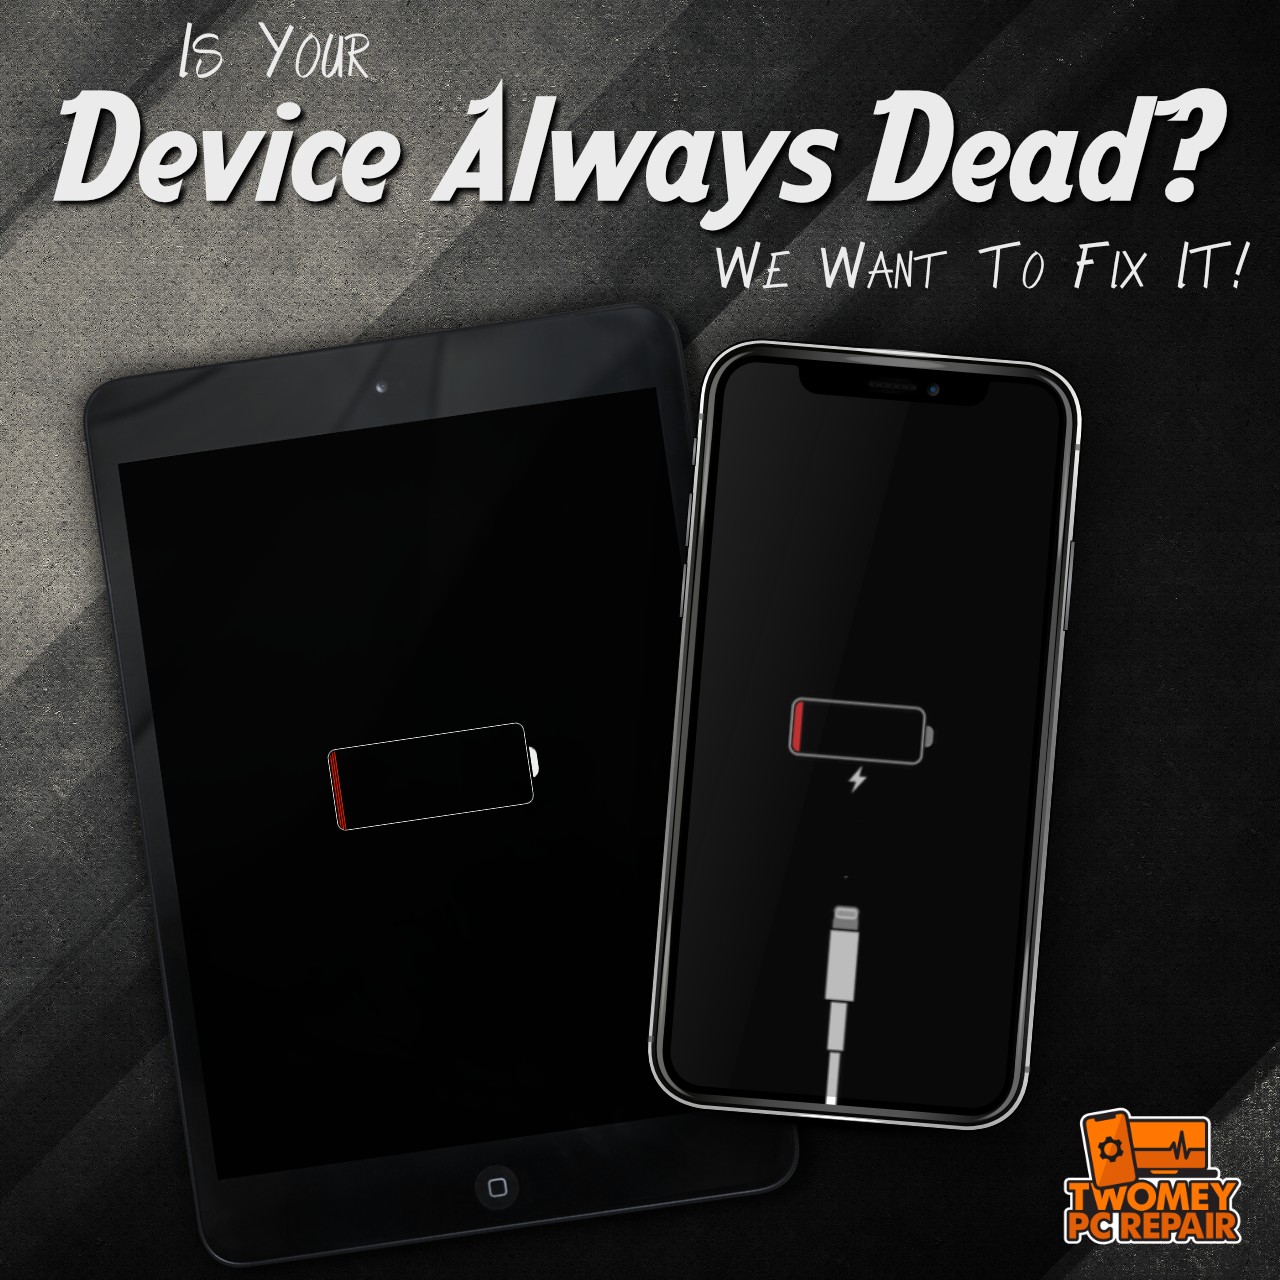 Is your cellphone always dead? We want to fix it with our charging port replacement and cellphone repair services.